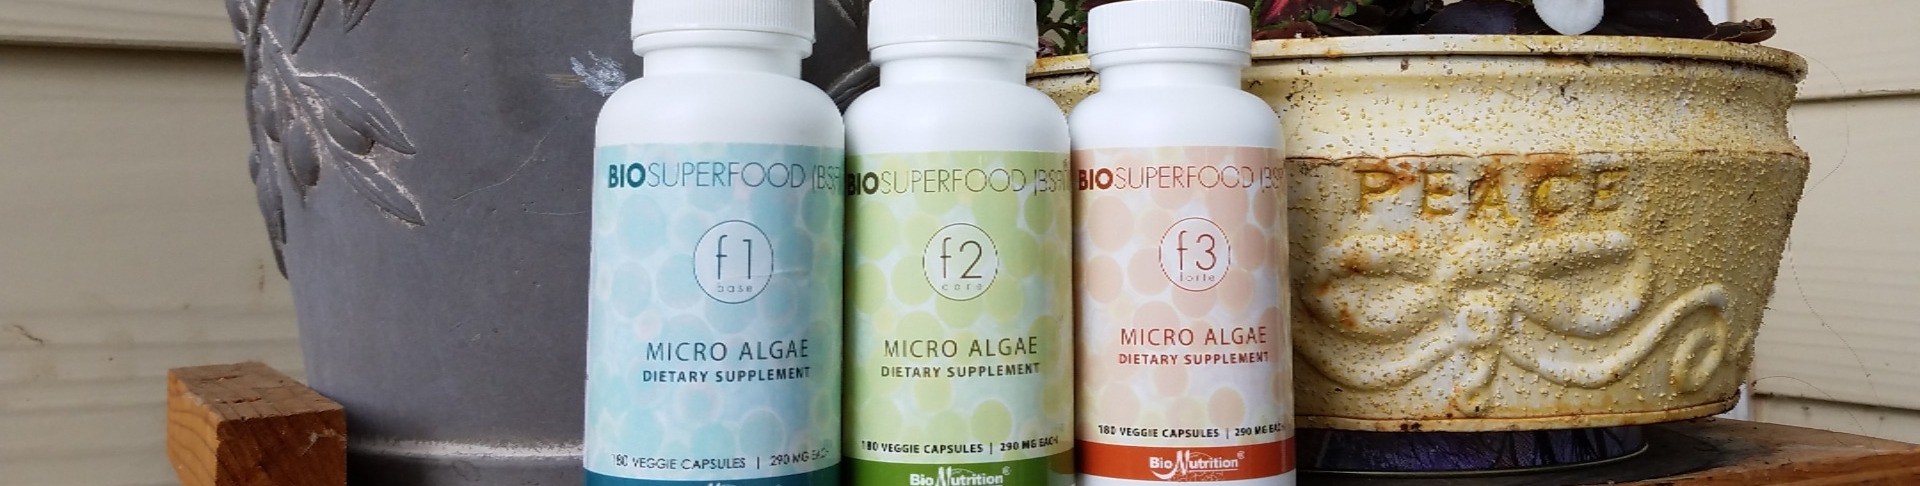 BioSuperfood comes in three formulas to accommodate different states of health.